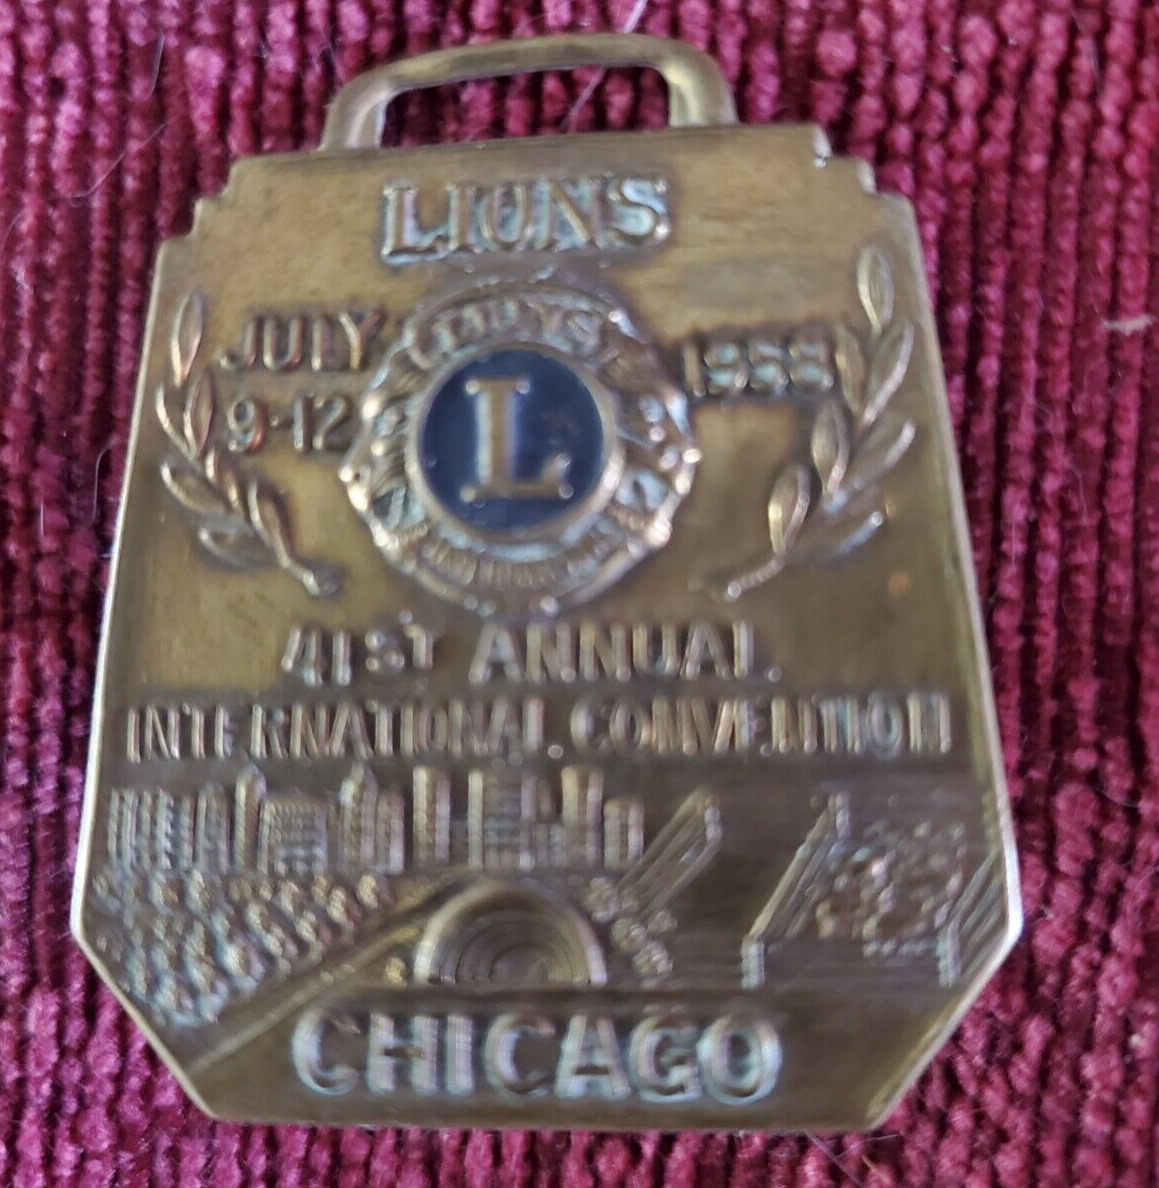 Lions Club Medal July 9th -12th 1958 Chicago